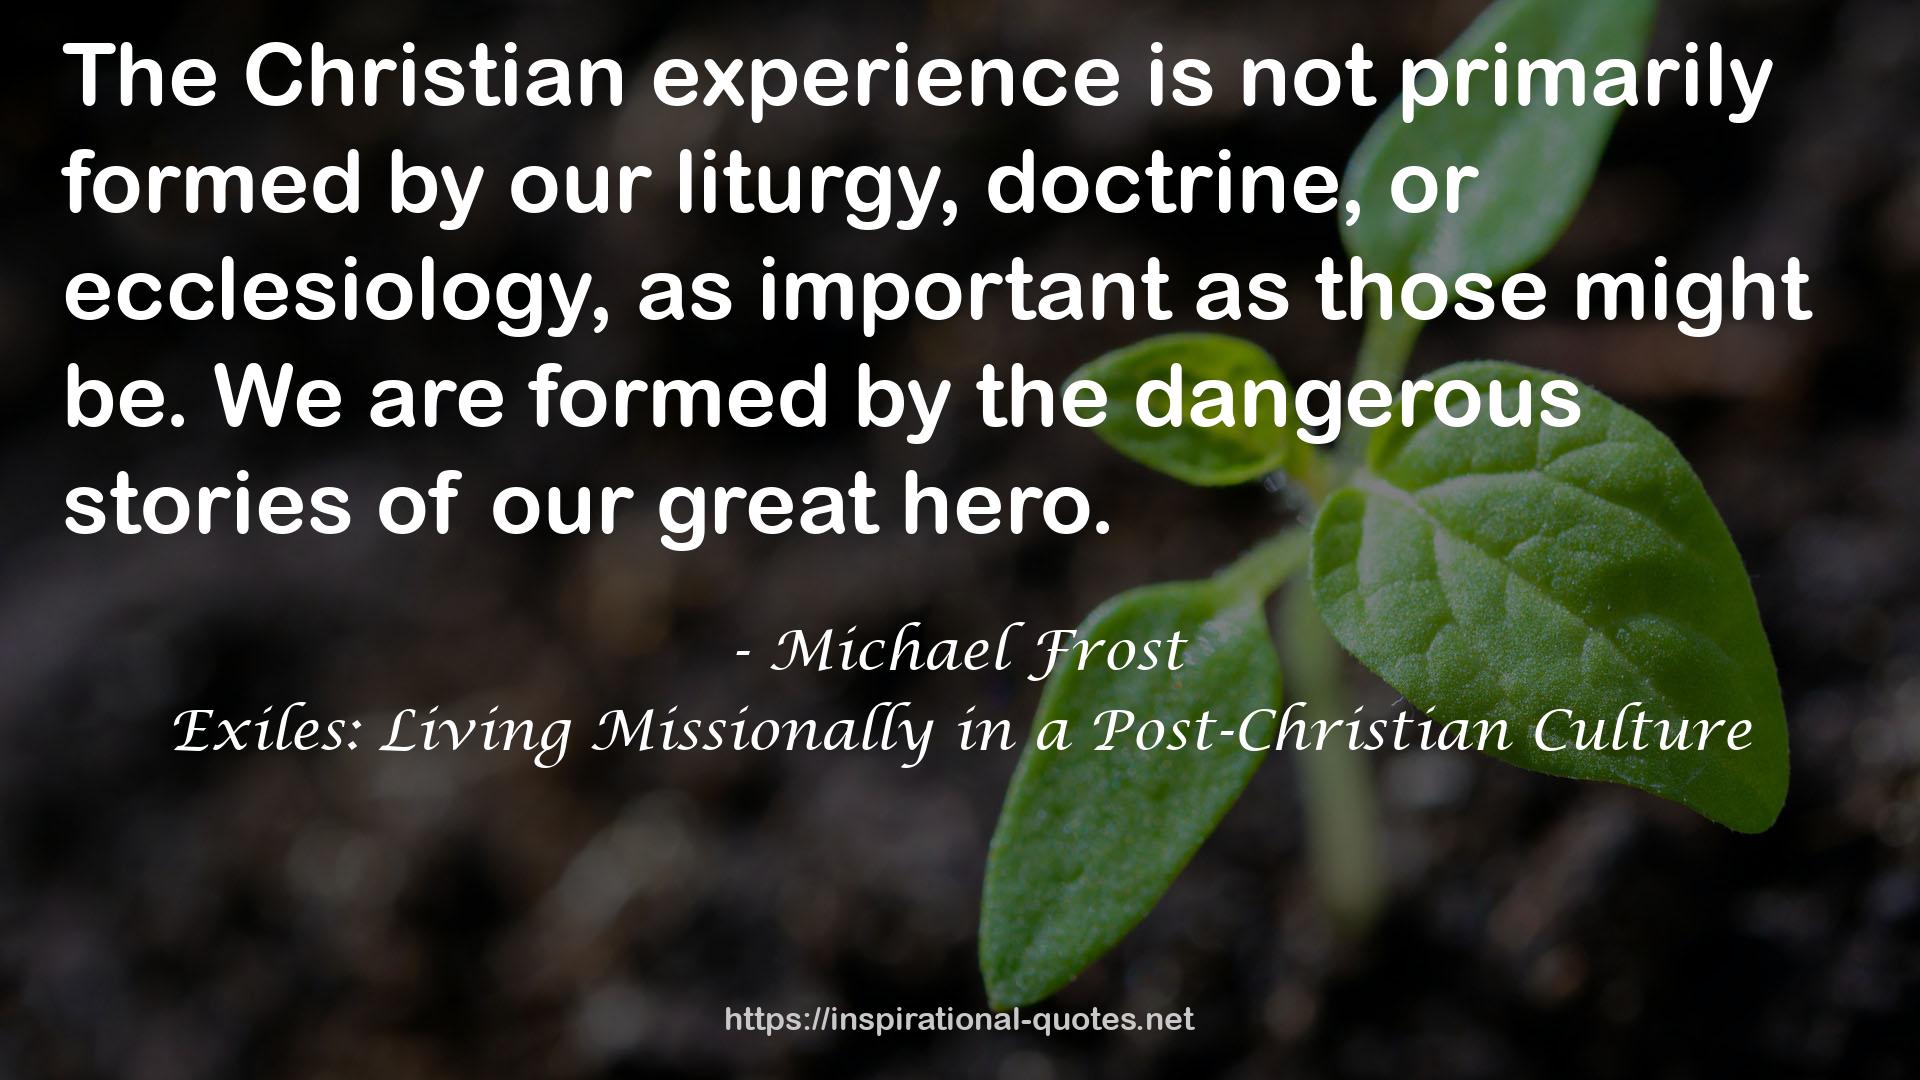 Exiles: Living Missionally in a Post-Christian Culture QUOTES